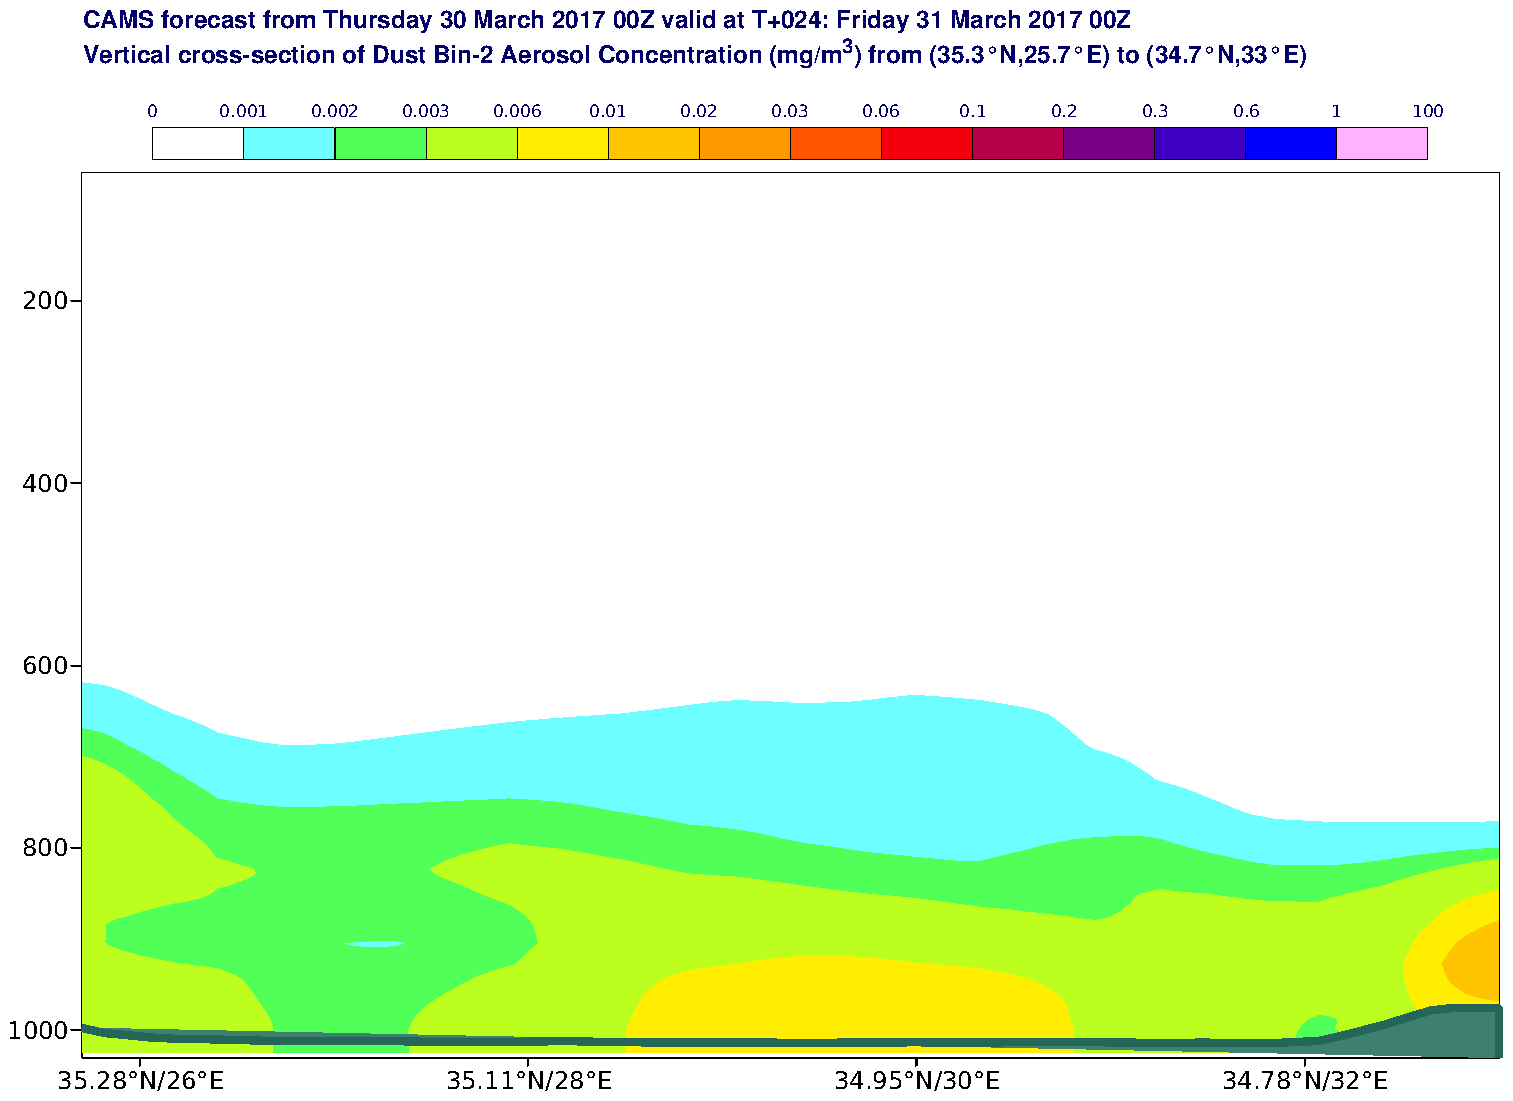 Vertical cross-section of Dust Bin-2 Aerosol Concentration (mg/m3) valid at T24 - 2017-03-31 00:00